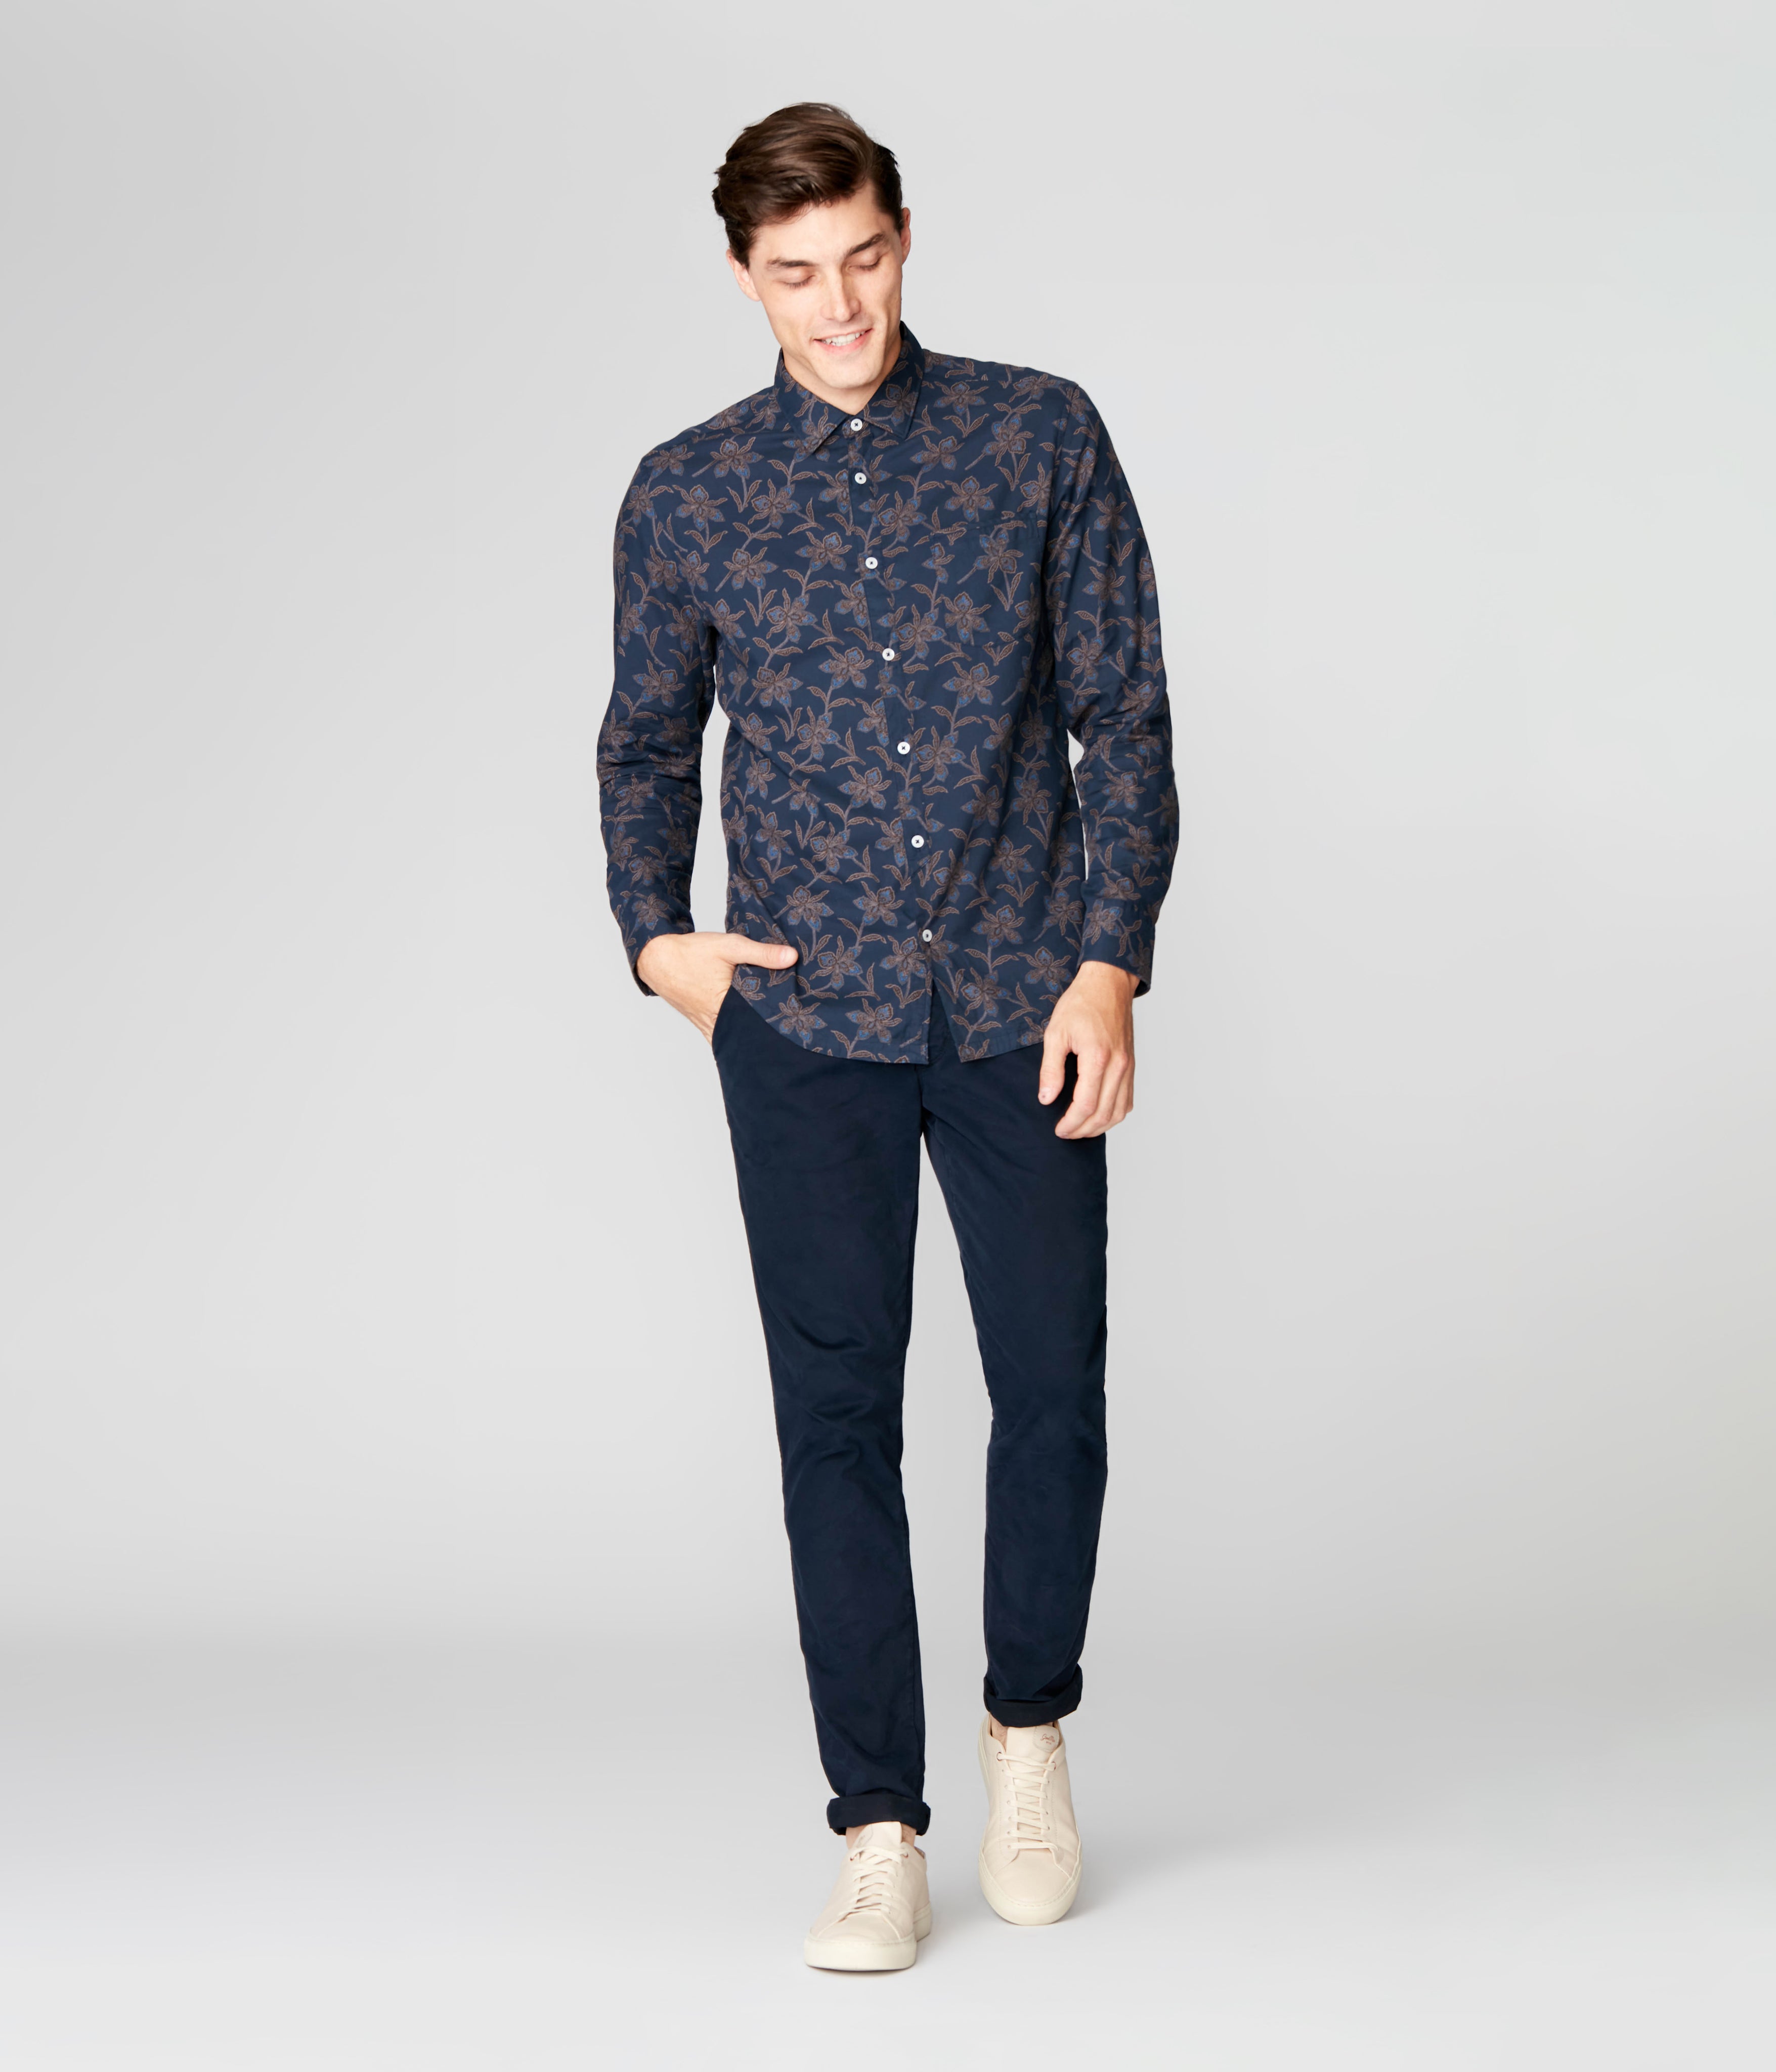 On-Point Print Shirt - Navy Magnolia Floral